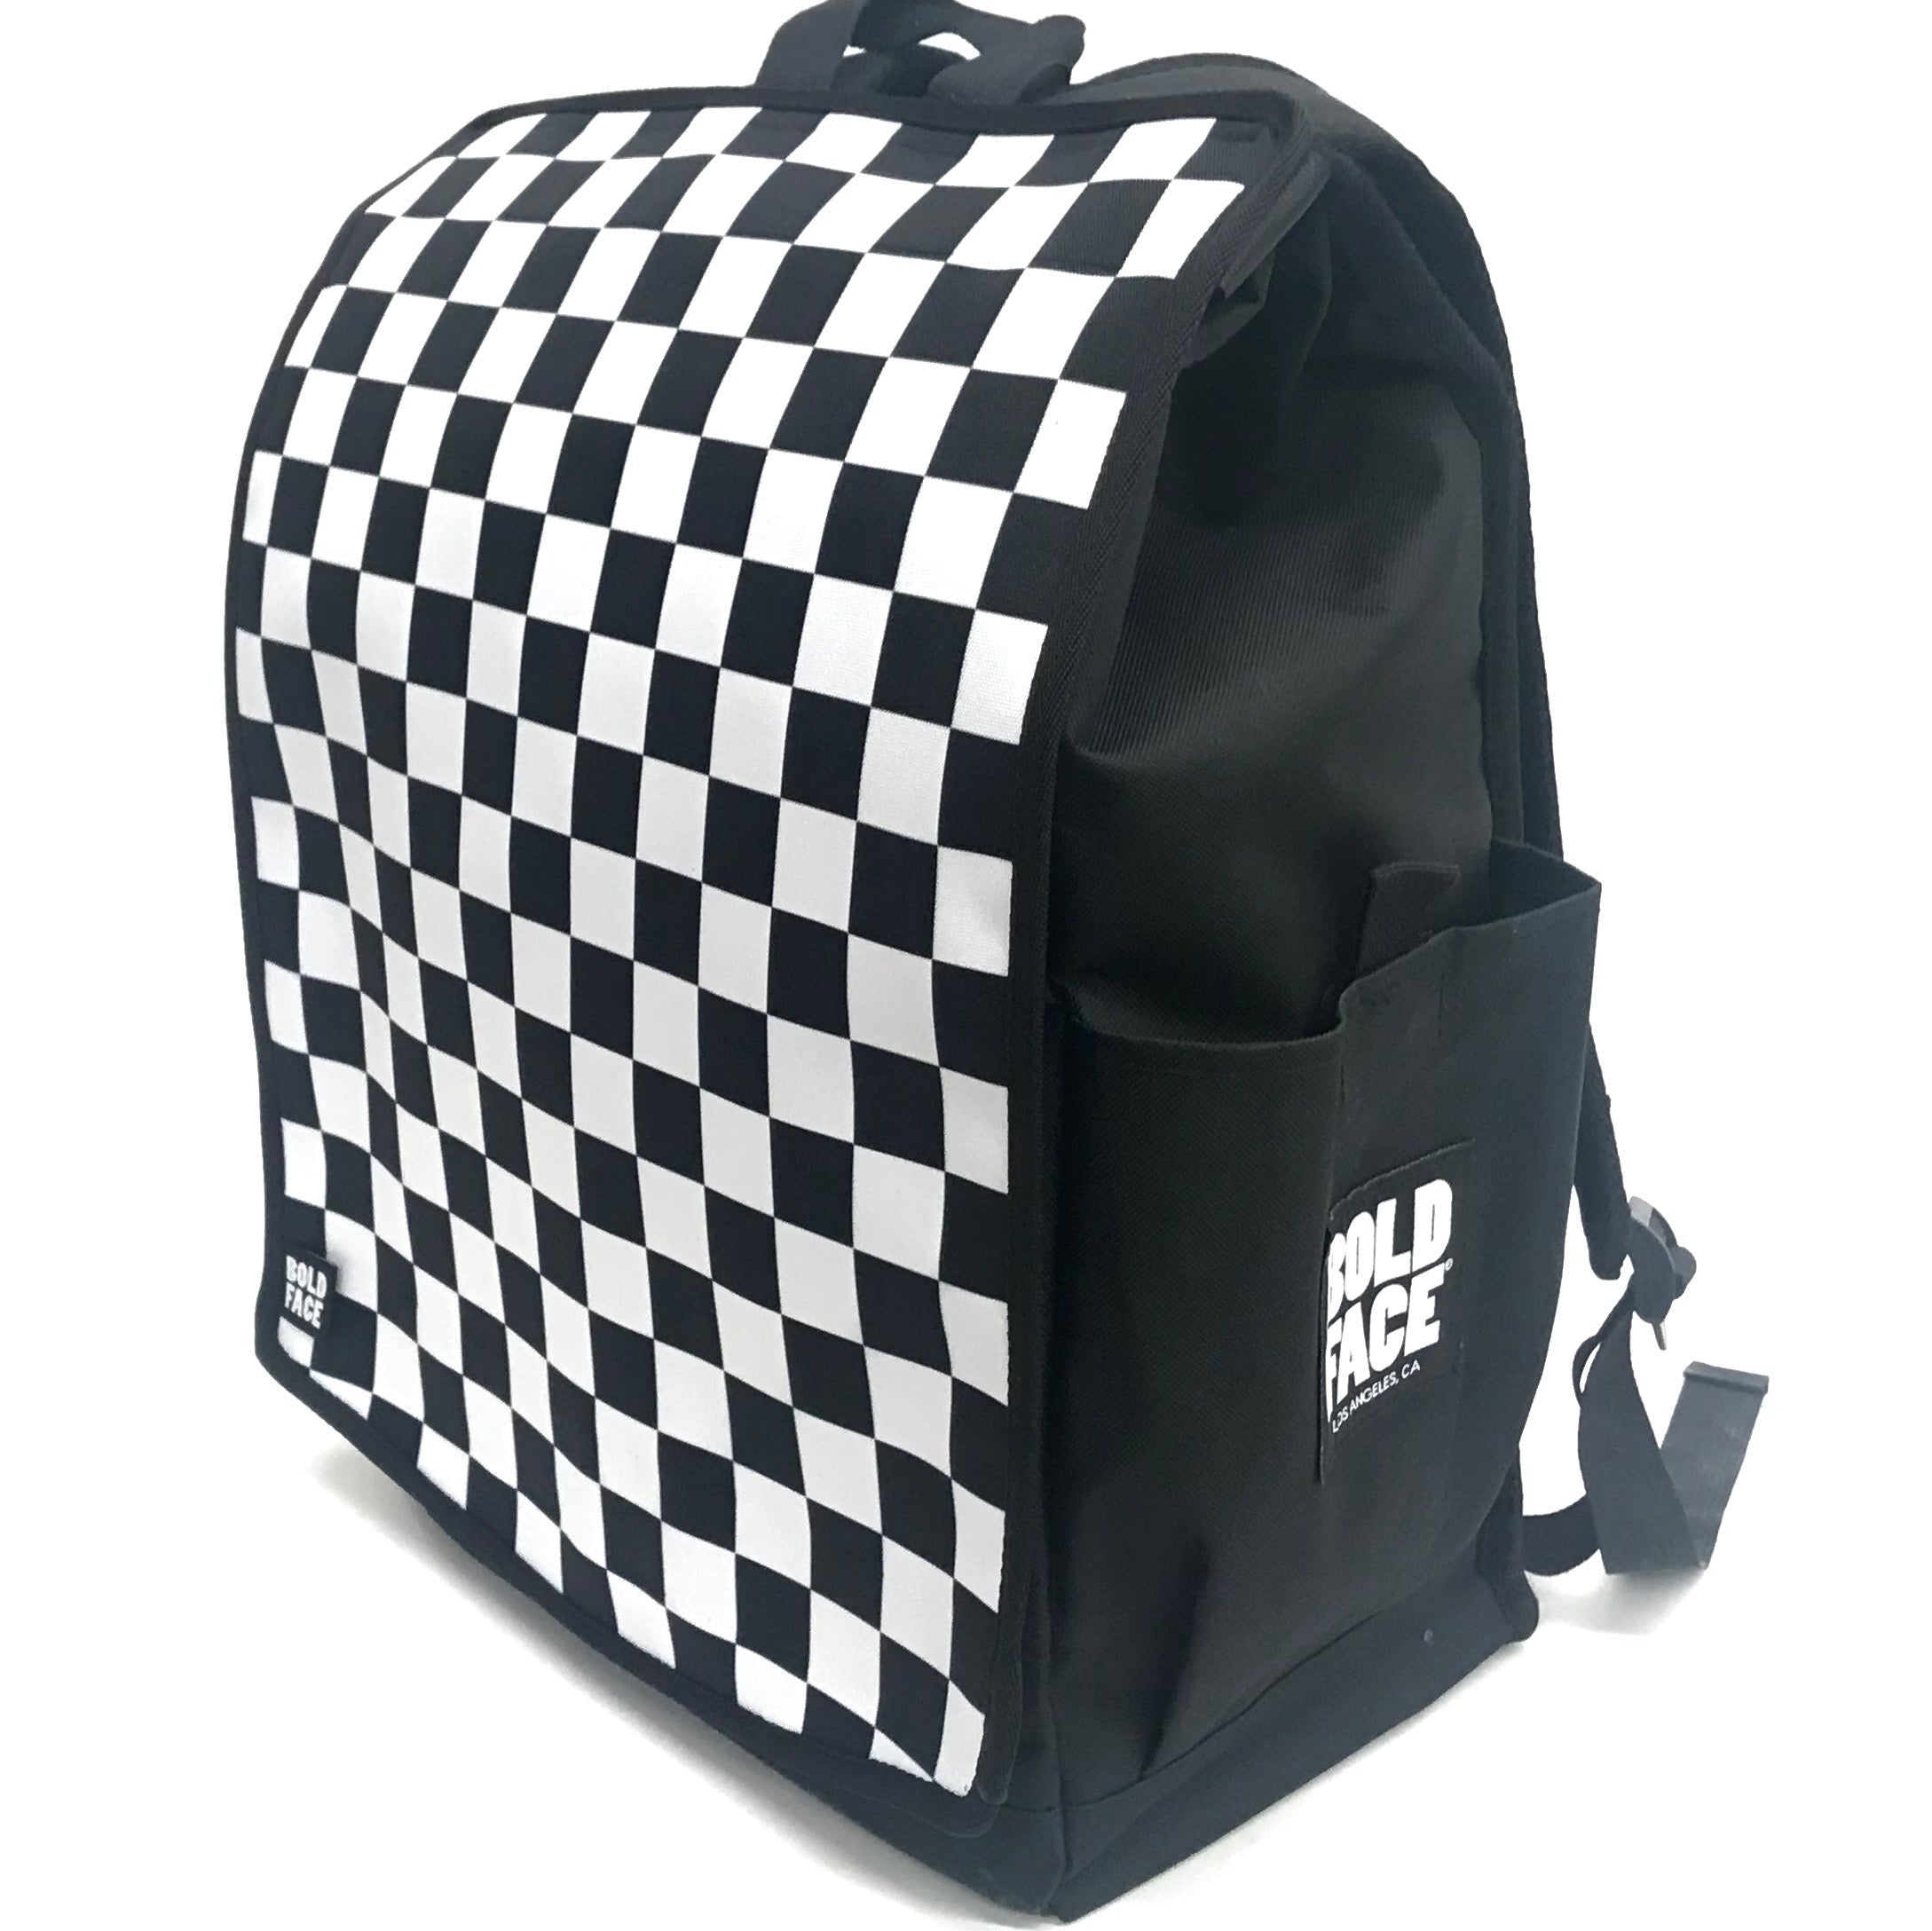 create your own vans backpack